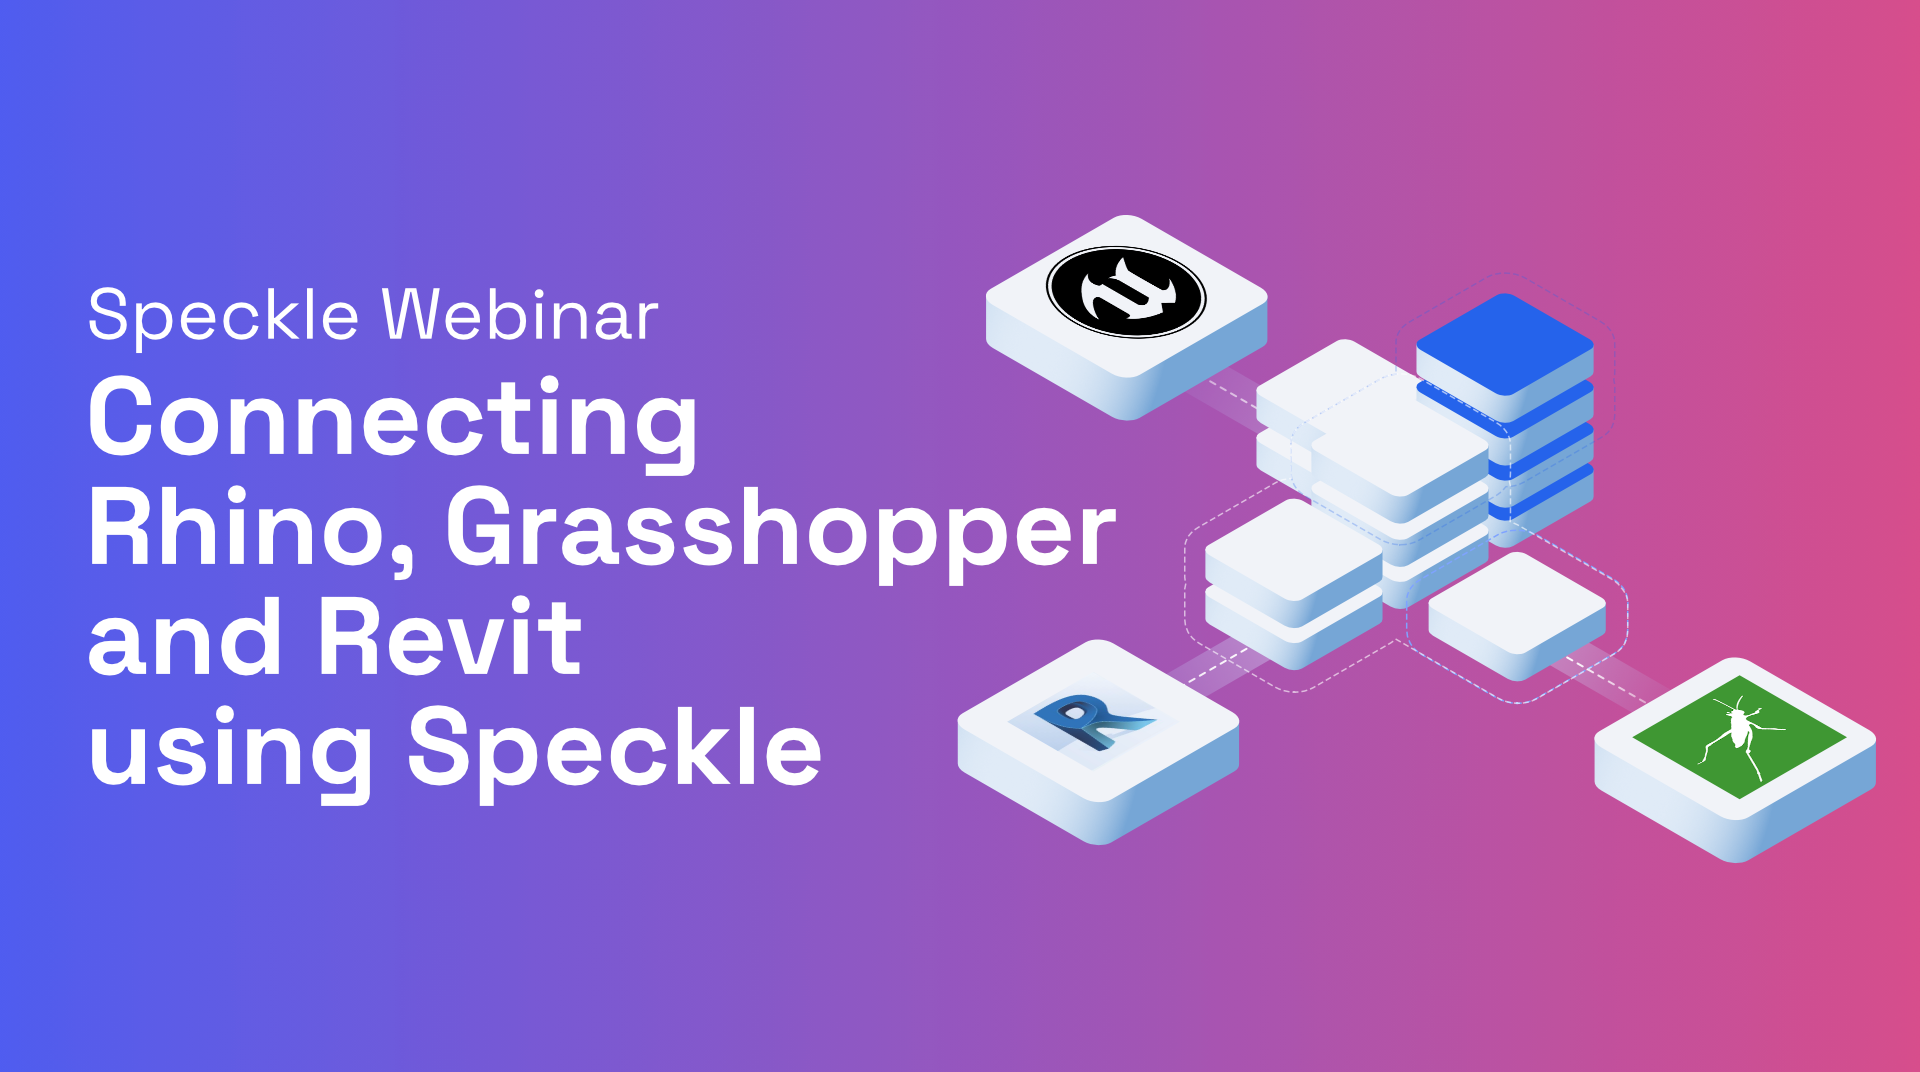 Create Revit models from Rhino/Grasshopper with Speckle